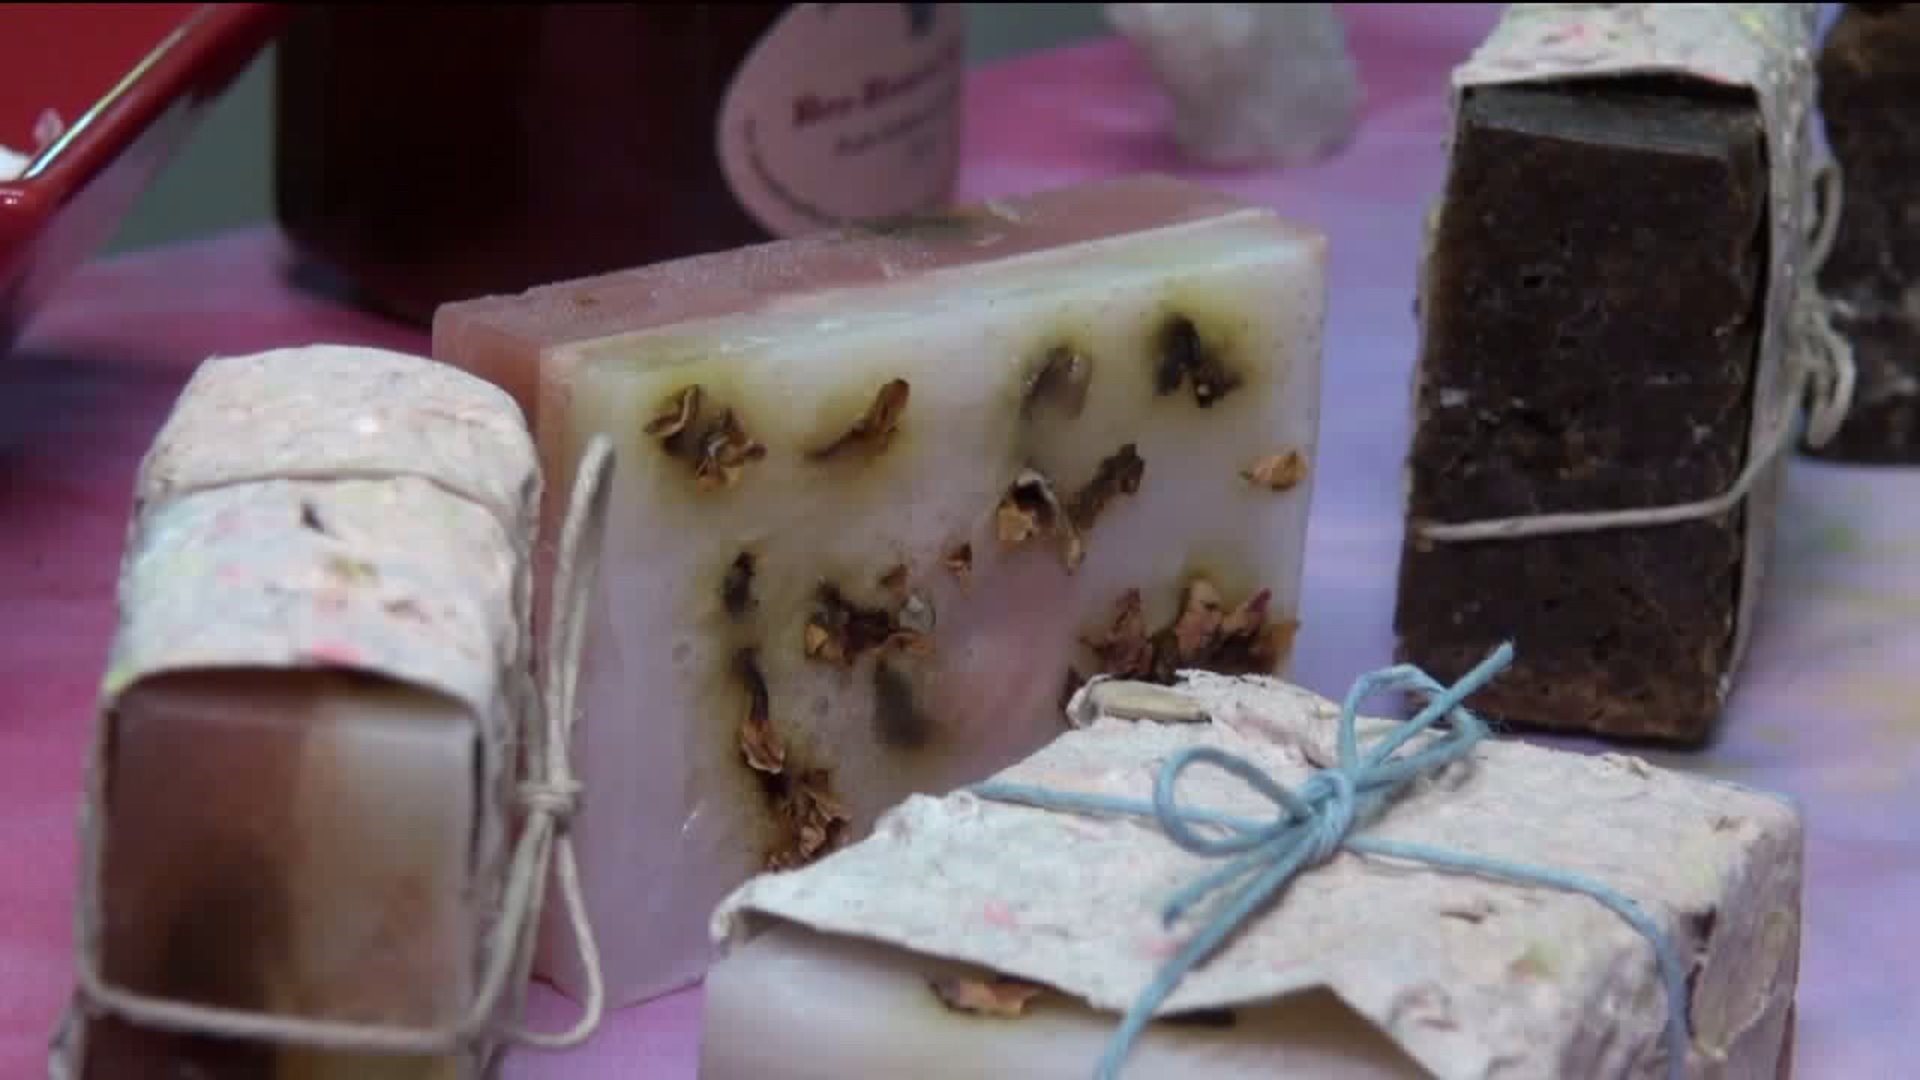 Making soap for her daughter quickly turned into an online sustainable soap business that a woman now runs out of her Honesdale home.